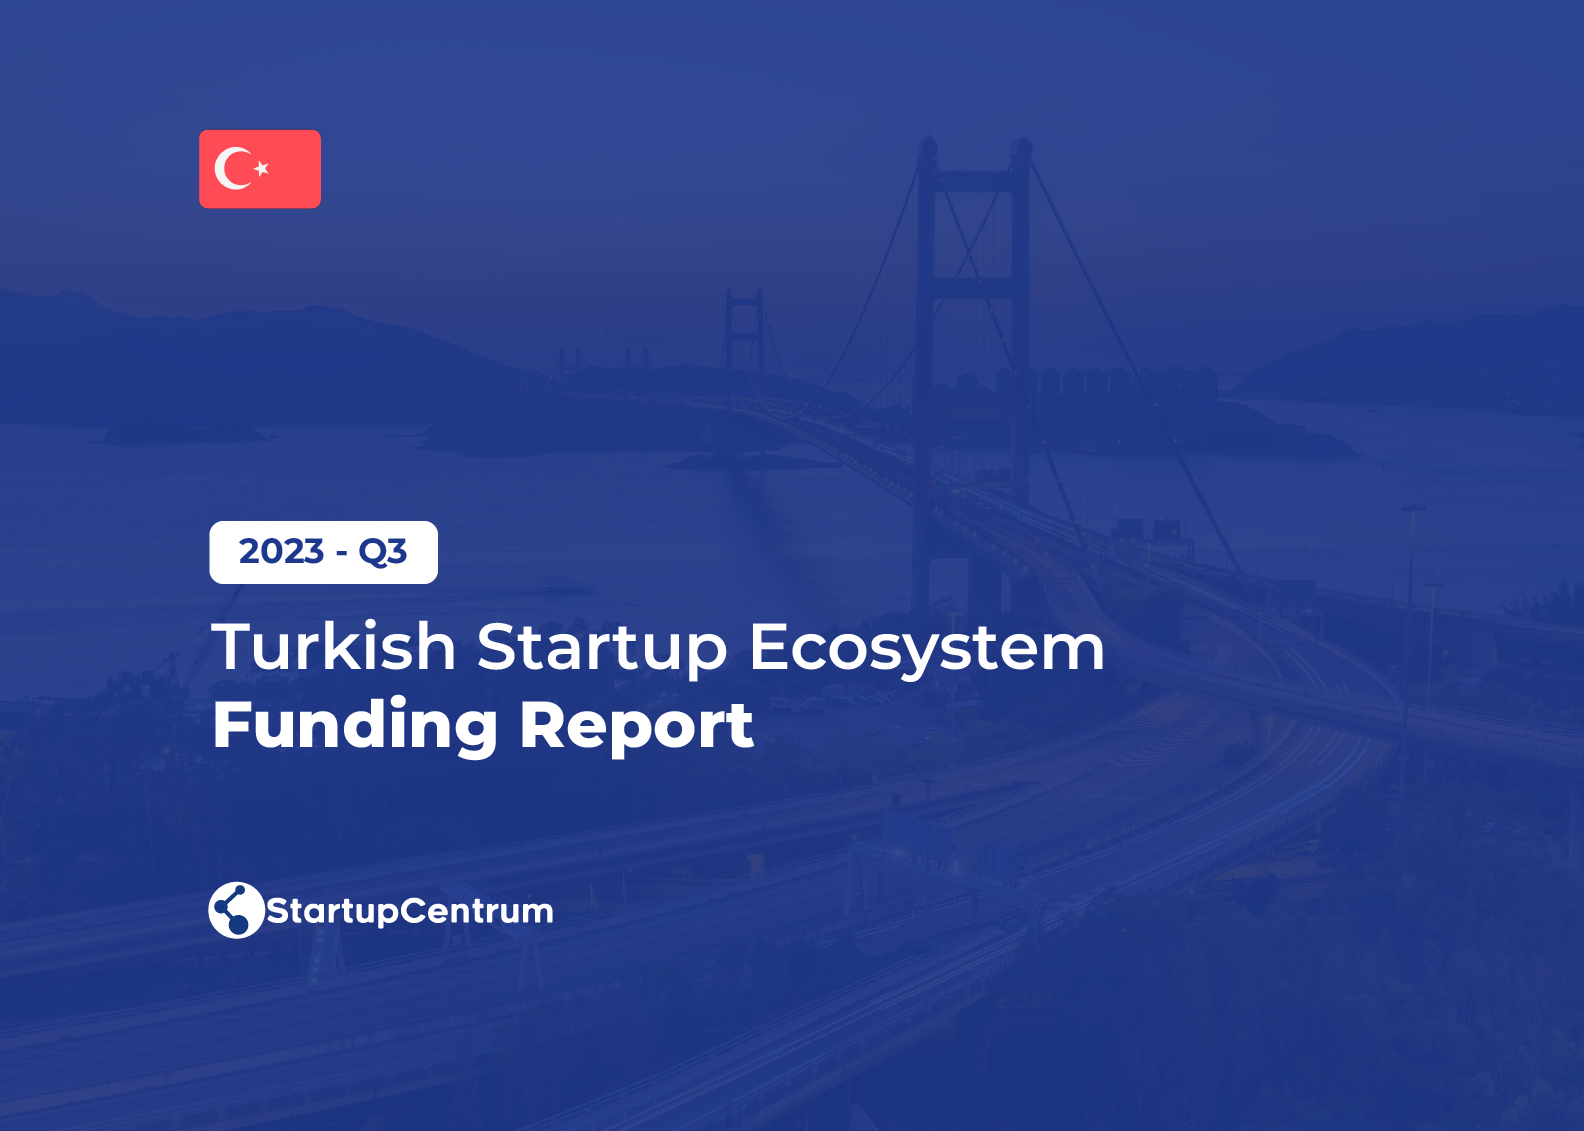 2023 - Q3 Turkish Startup Ecosystem Funding Report Cover Image